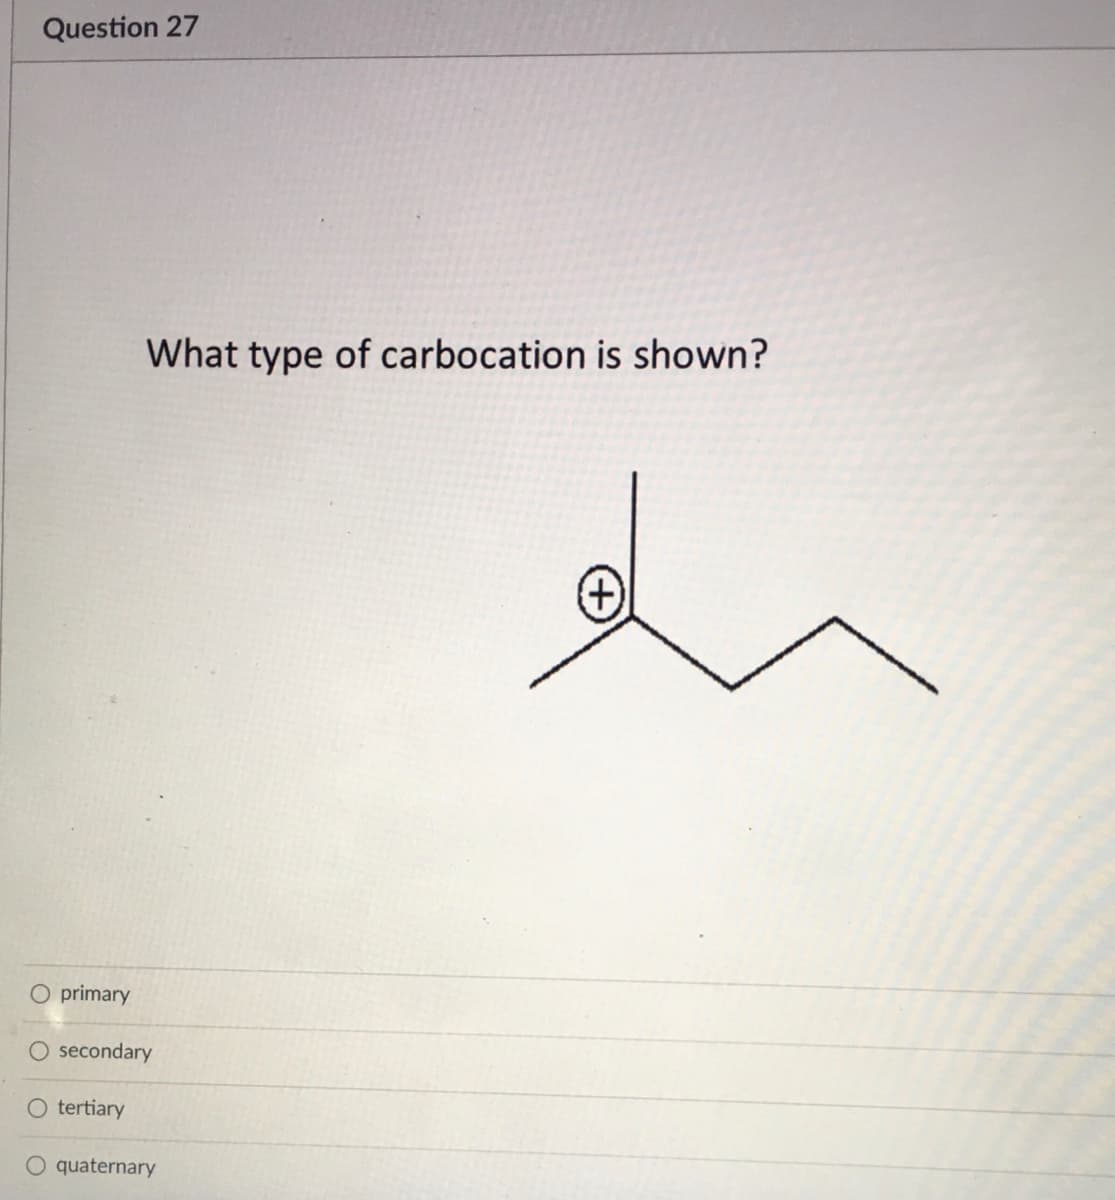 Question 27
What type of carbocation is shown?
人
(+)
O primary
secondary
O tertiary
O quaternary
